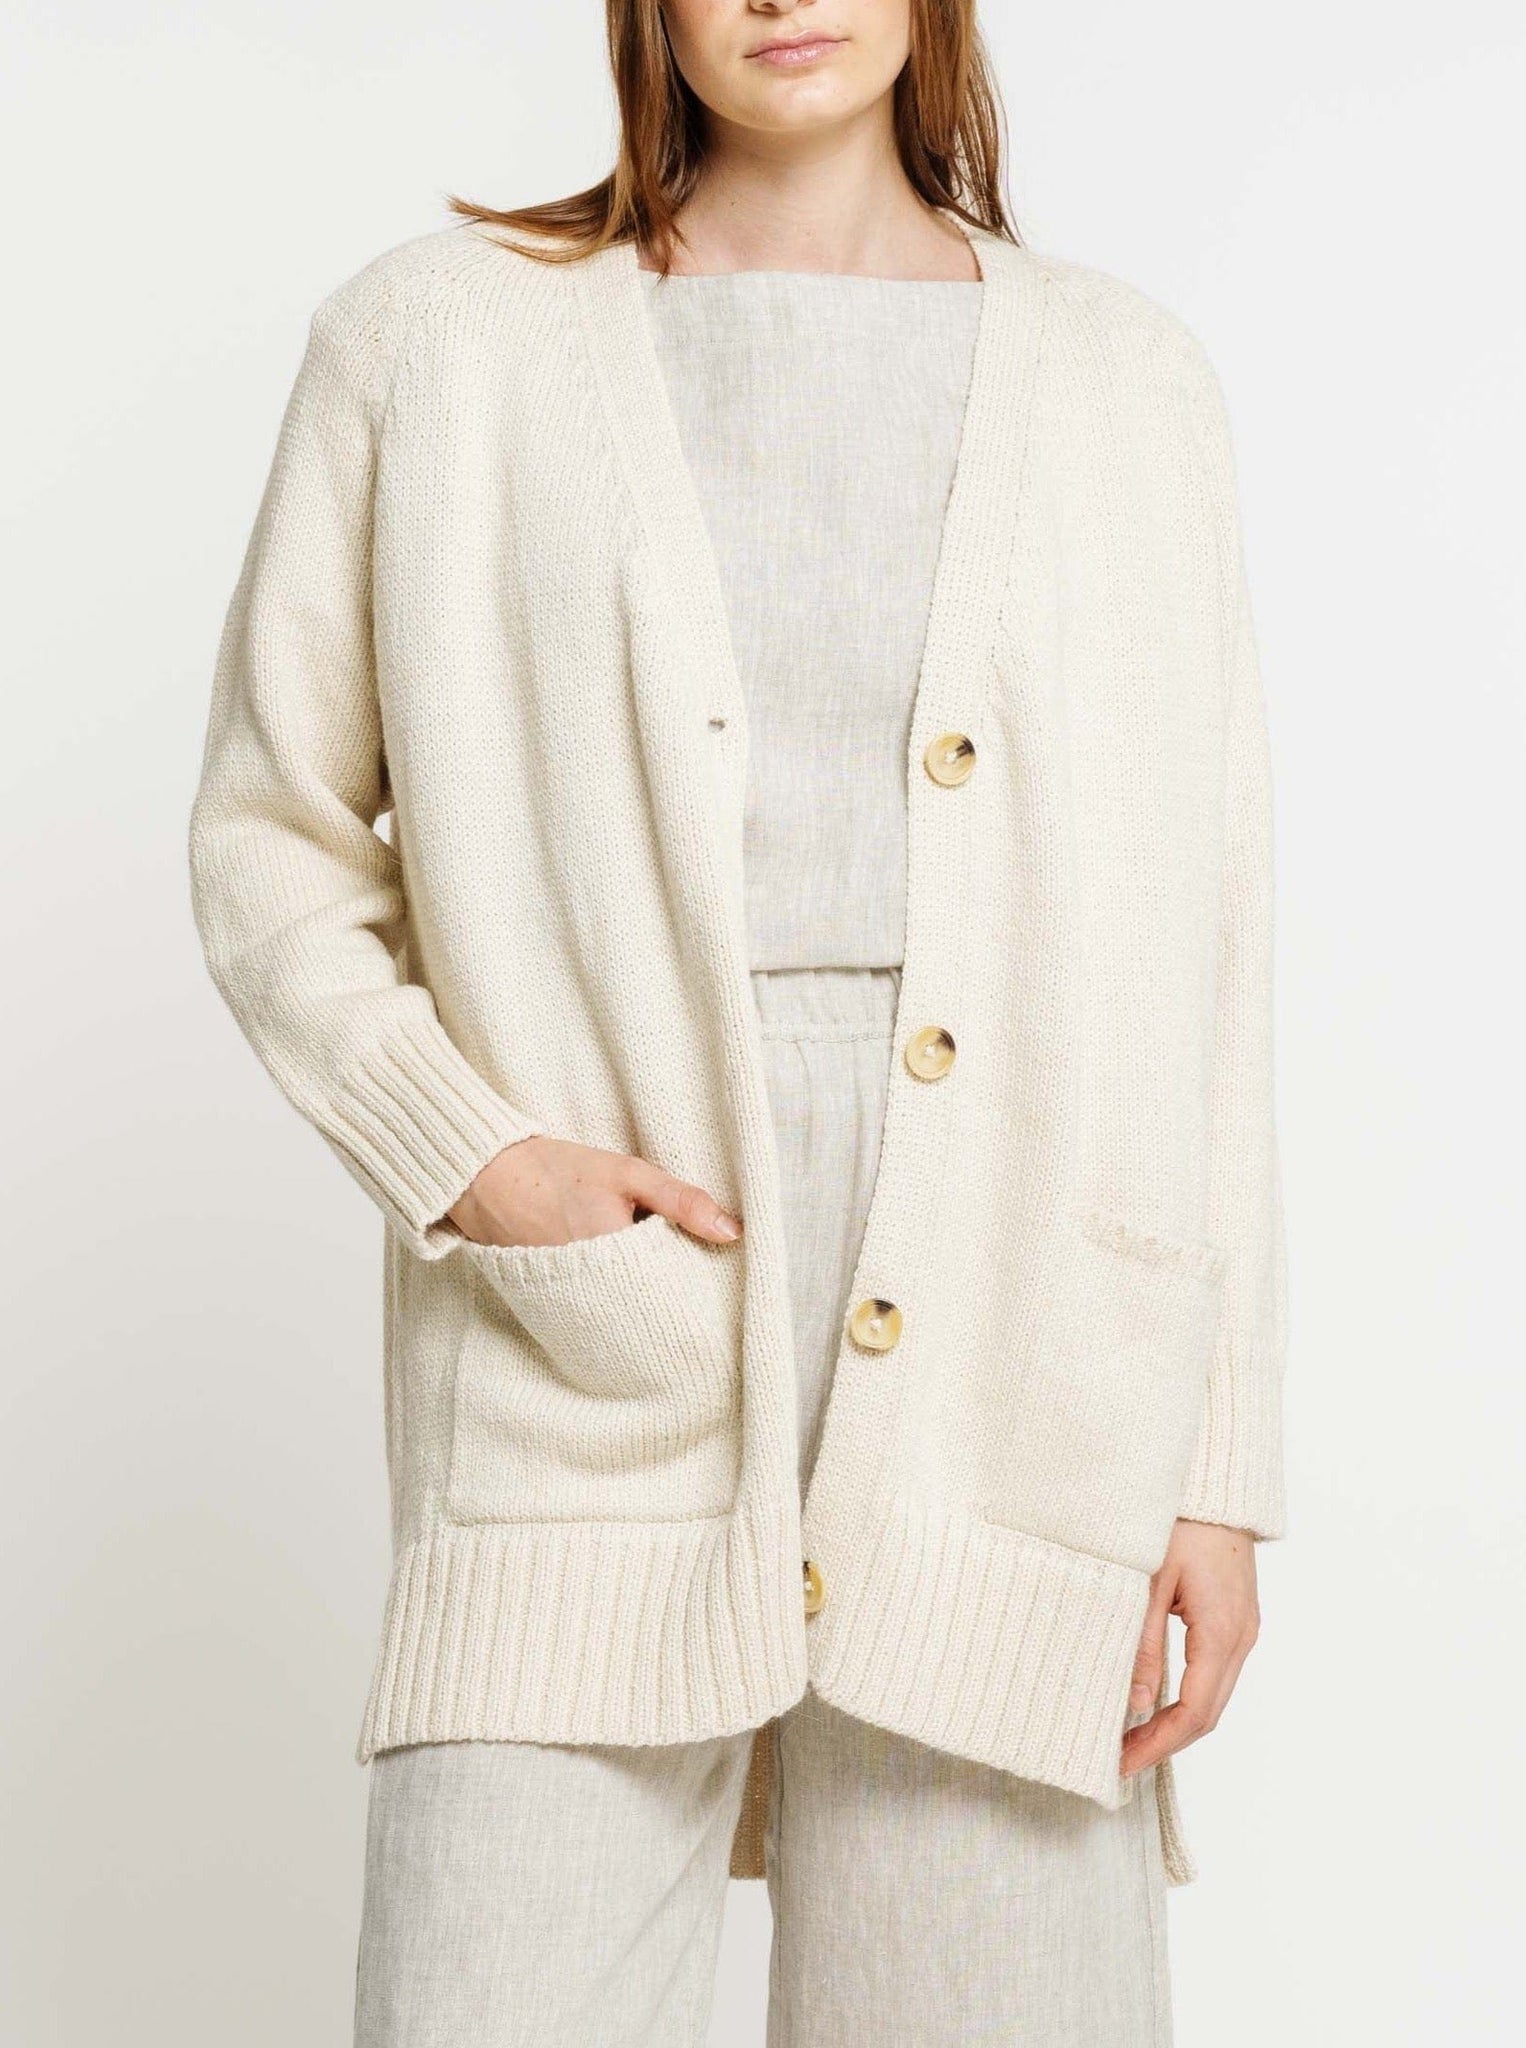 The model is wearing a Valley Cardigan - Vanilla with buttons.